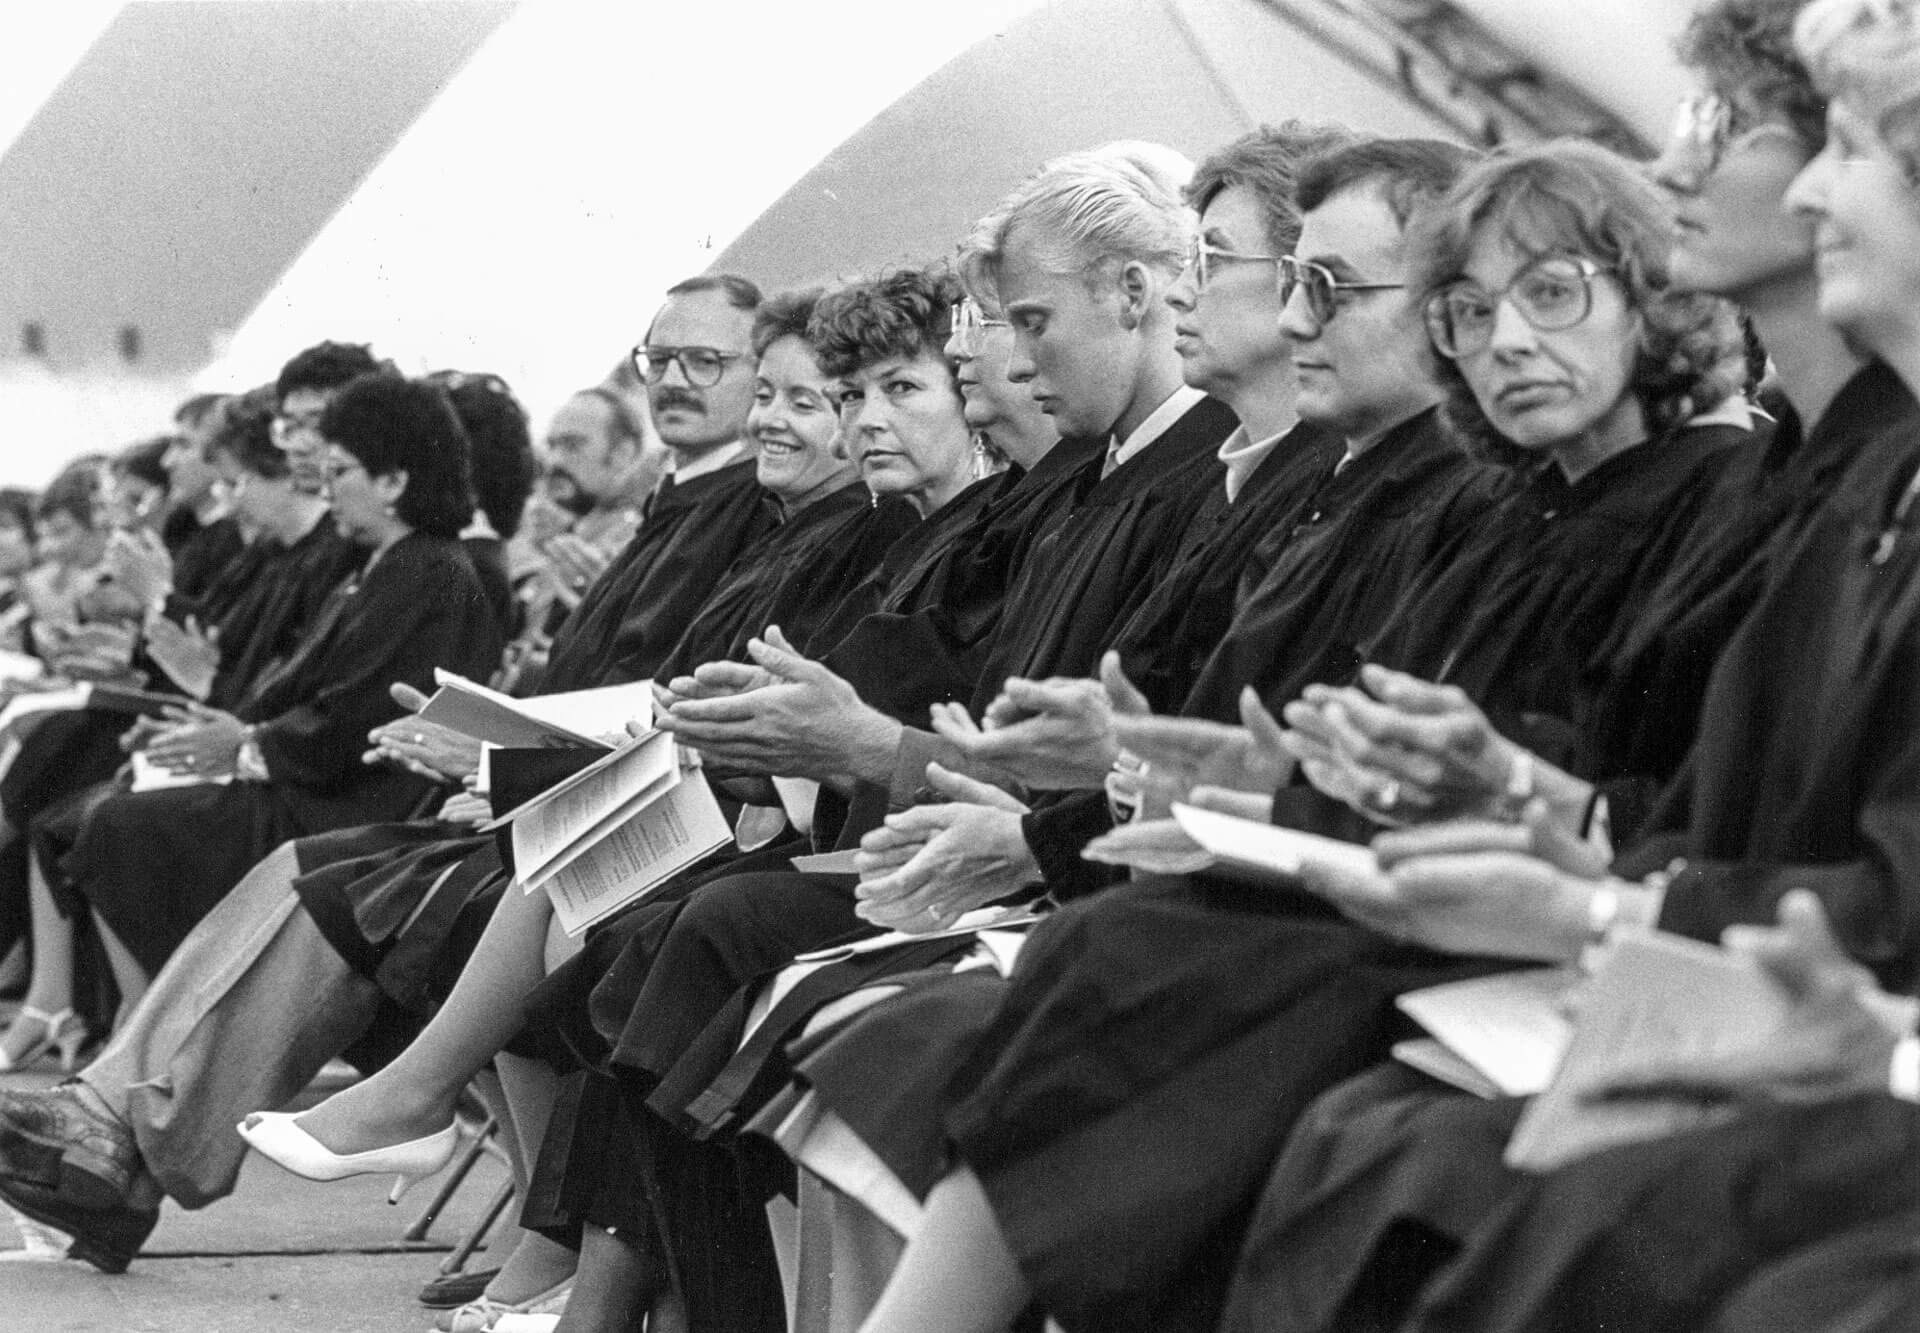 vintage photo of graduates seated in gowns at convocation